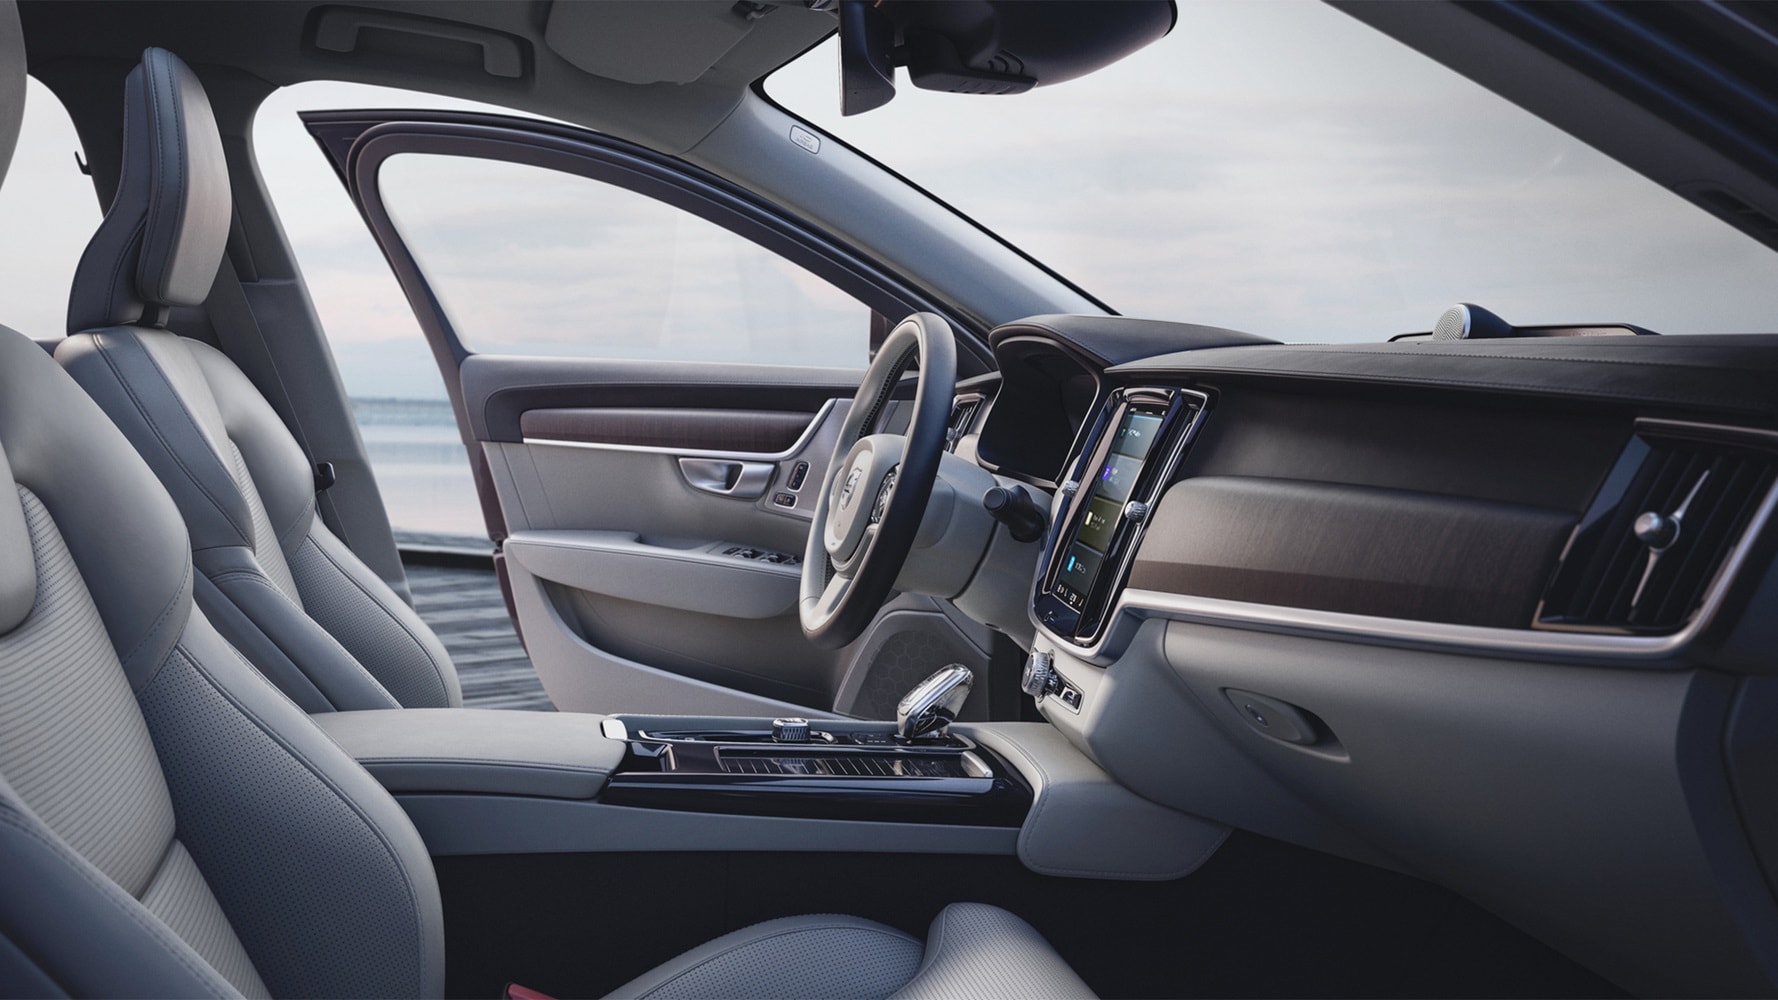 Interior drivers position in Volvo S90 Recharge seen from passenger position.